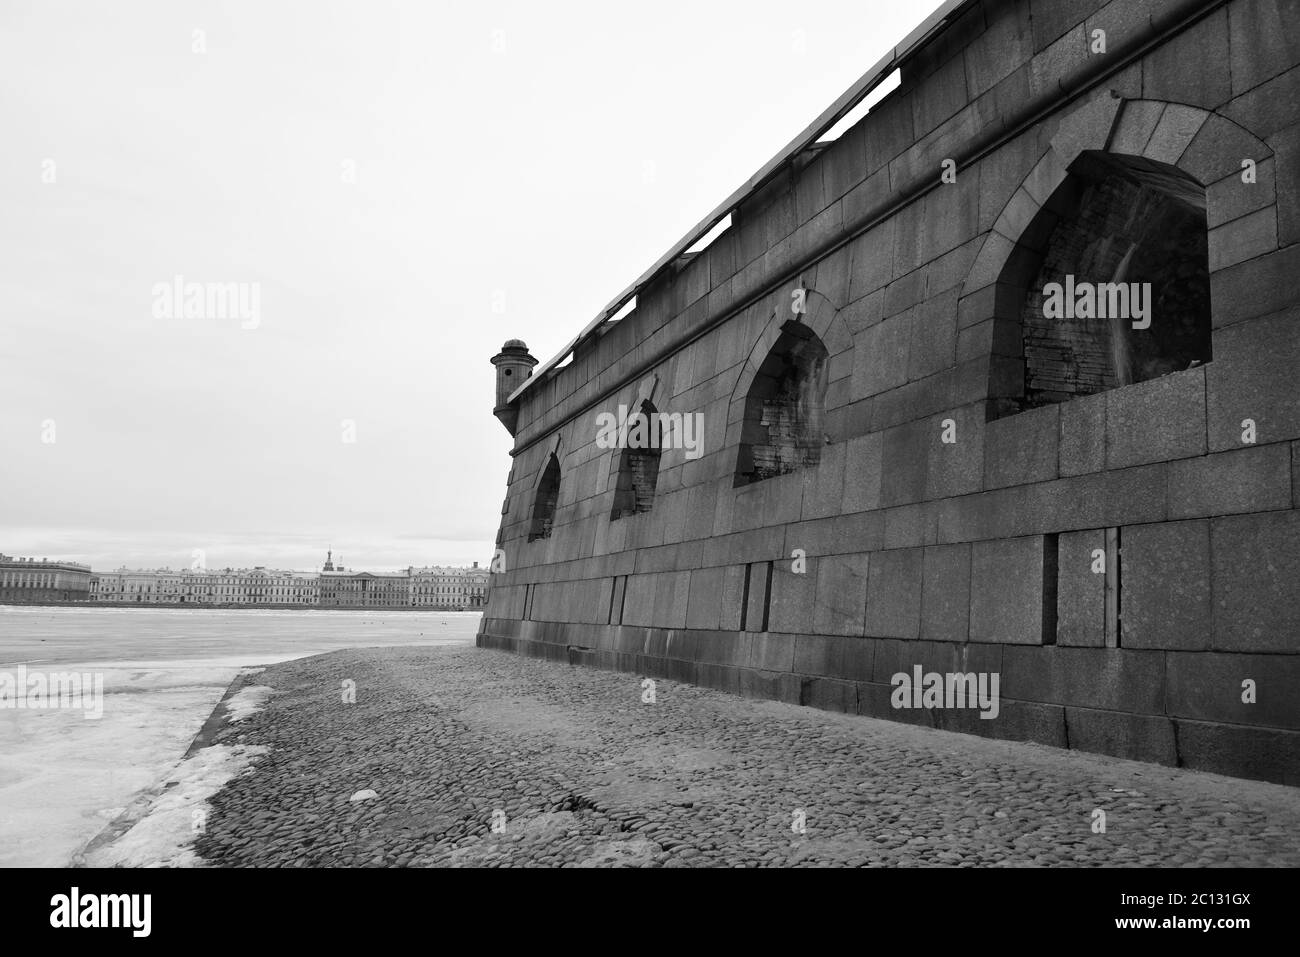 Peter paul bastion Black and White Stock Photos & Images - Alamy